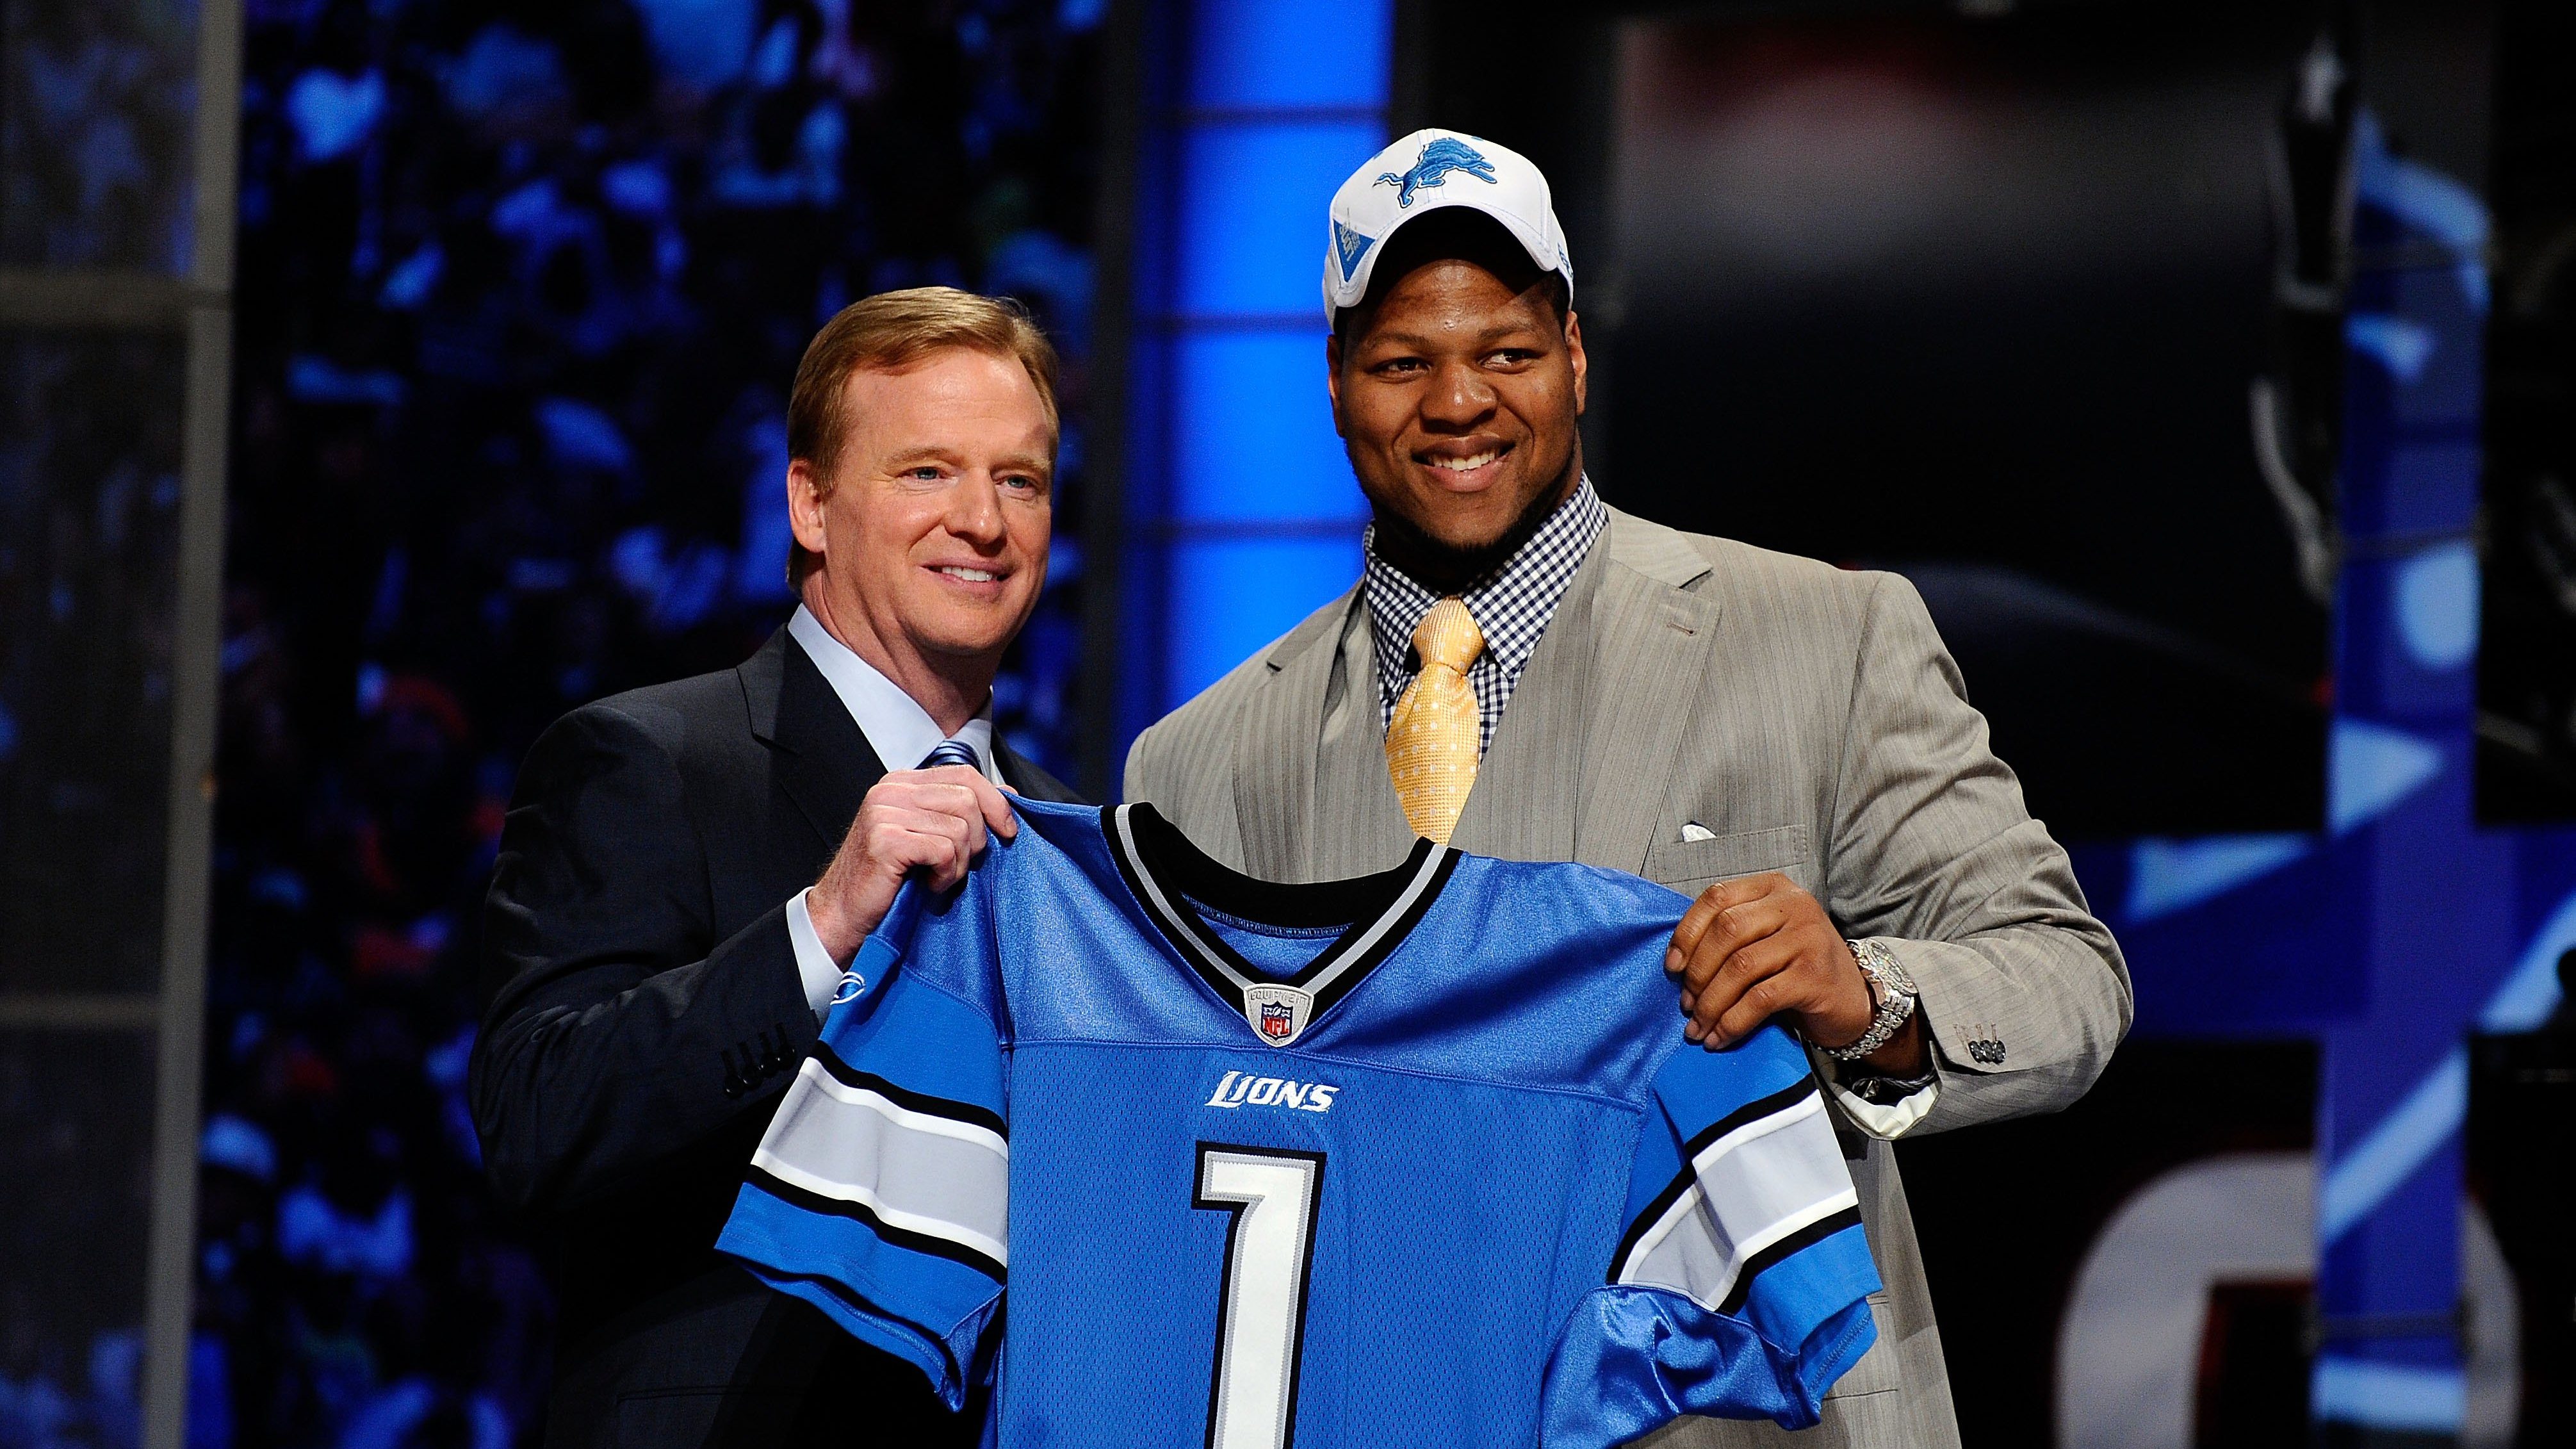 Picking Lions 5 Best Draft Picks The Last 30 Years